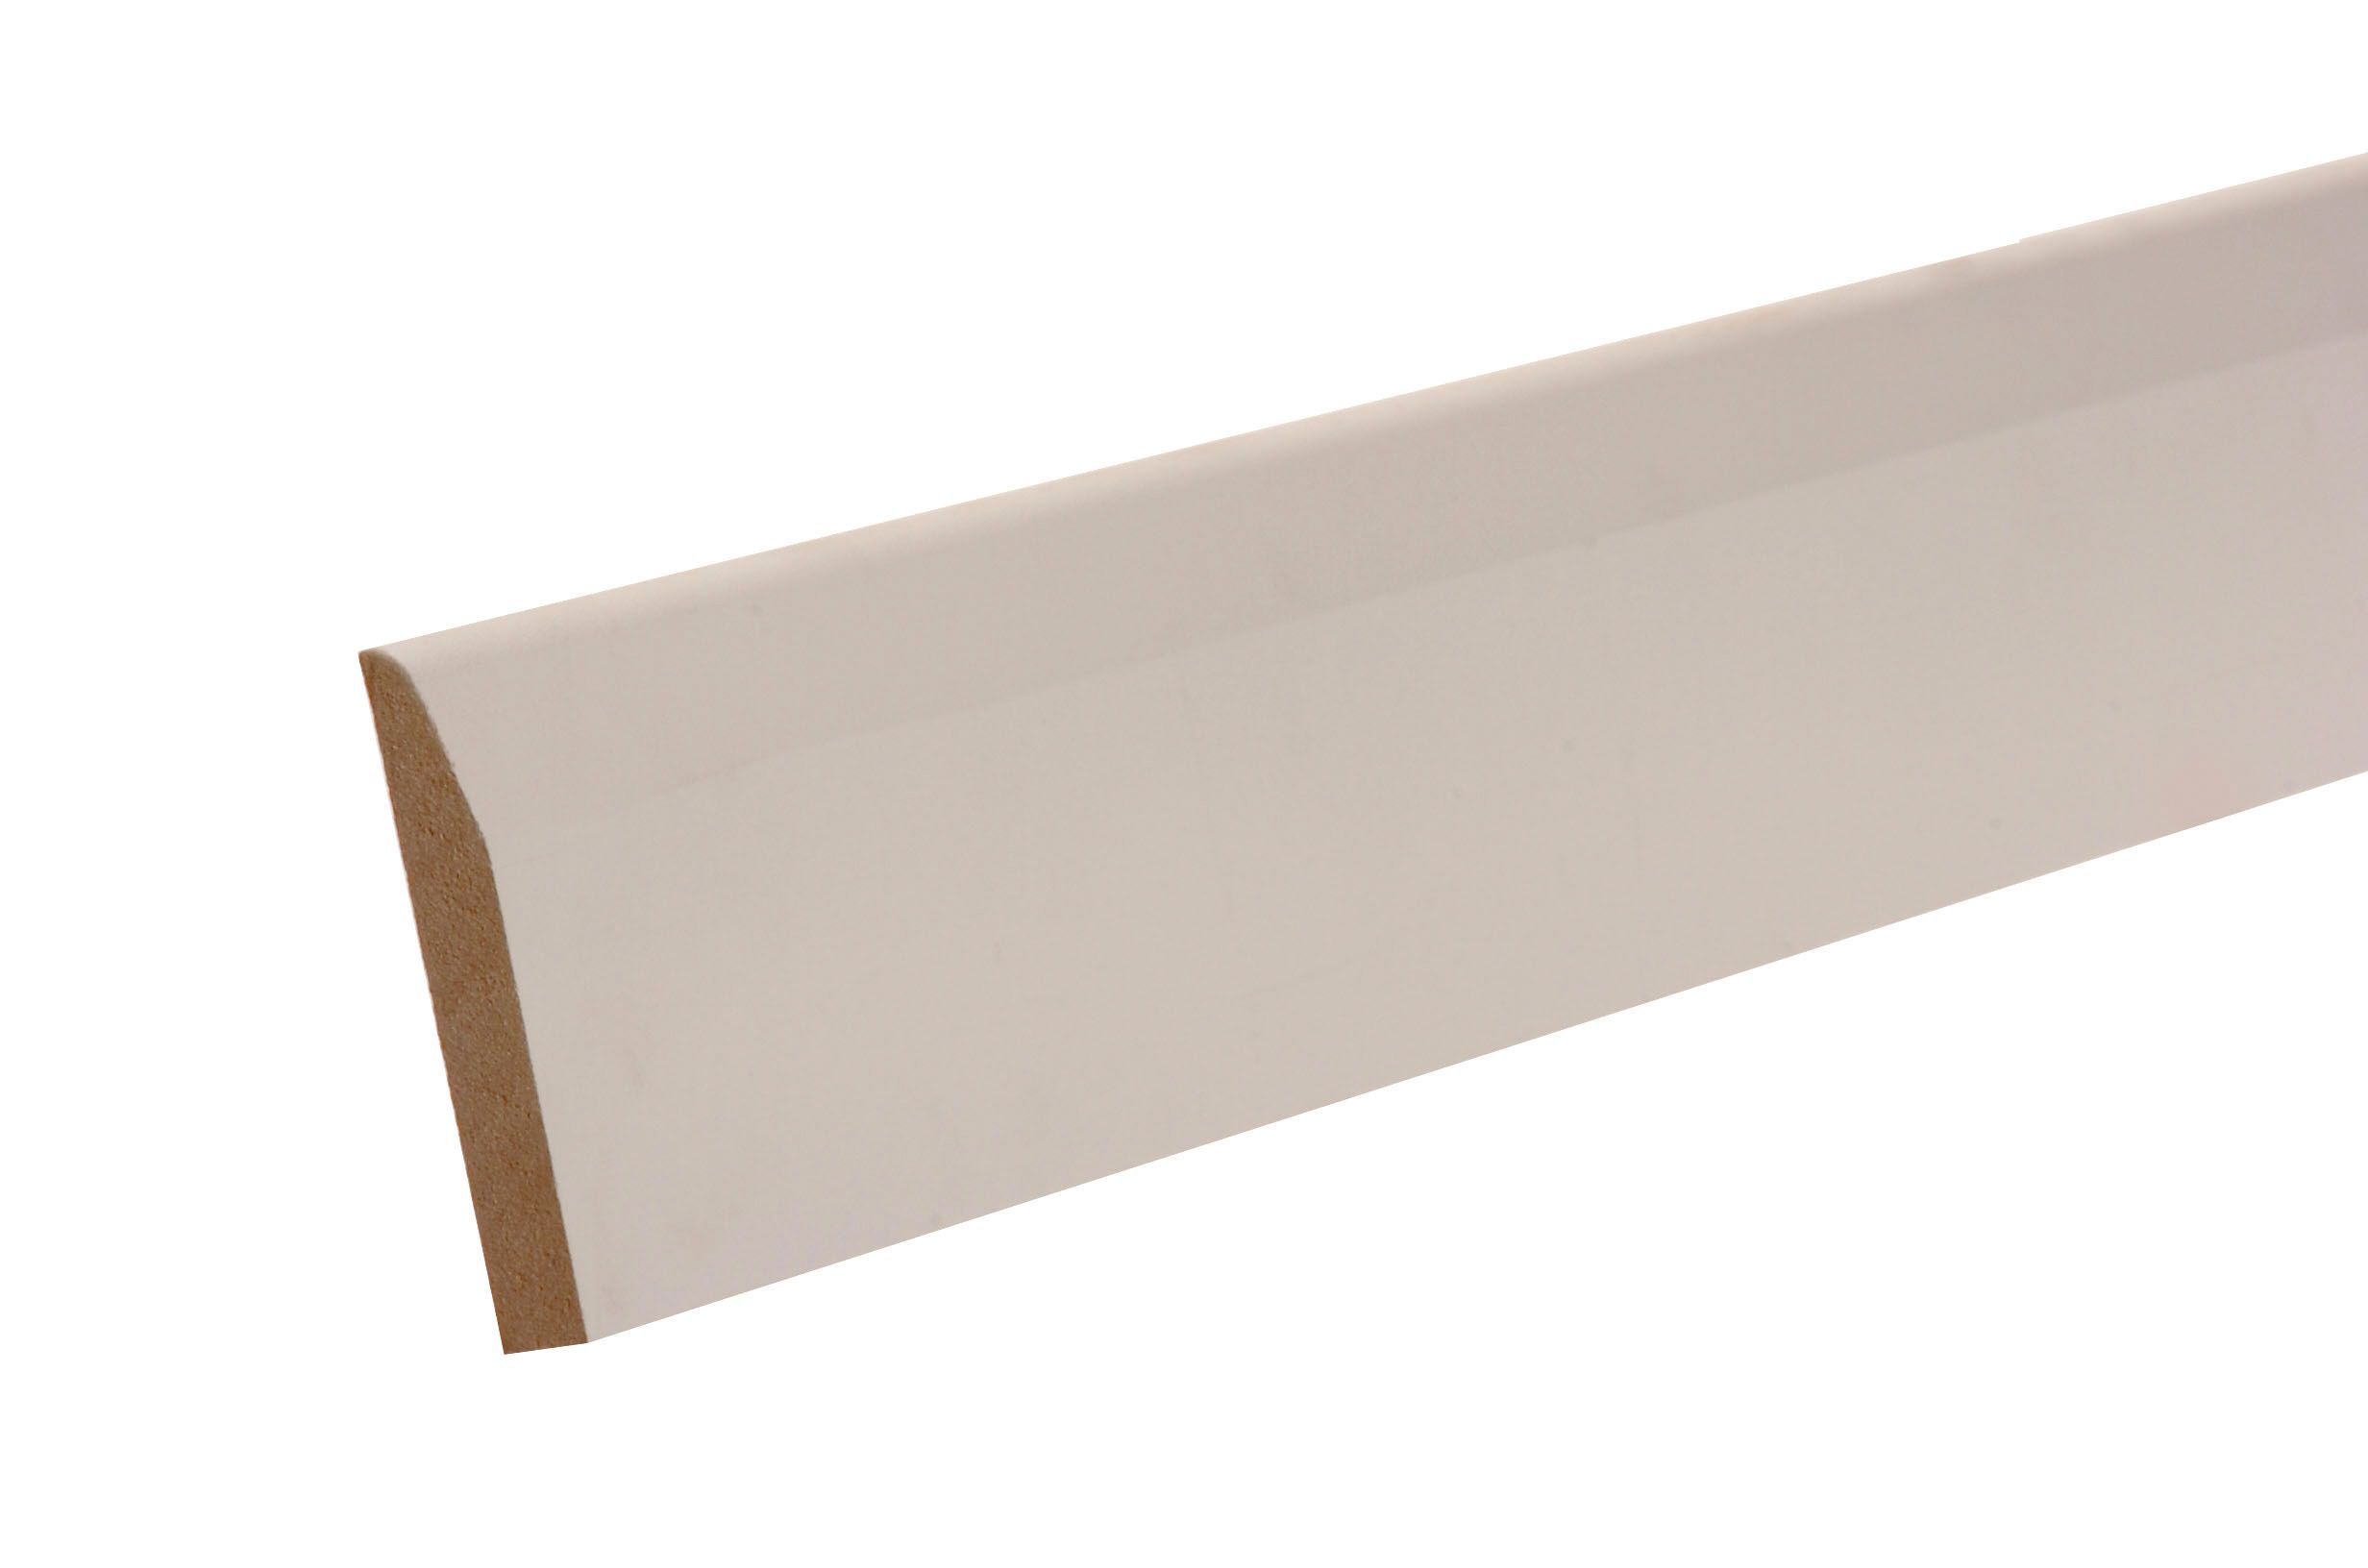 Metsä Wood Primed White MDF Chamfered Skirting board (L)2.4m (W)119mm (T)14.5mm